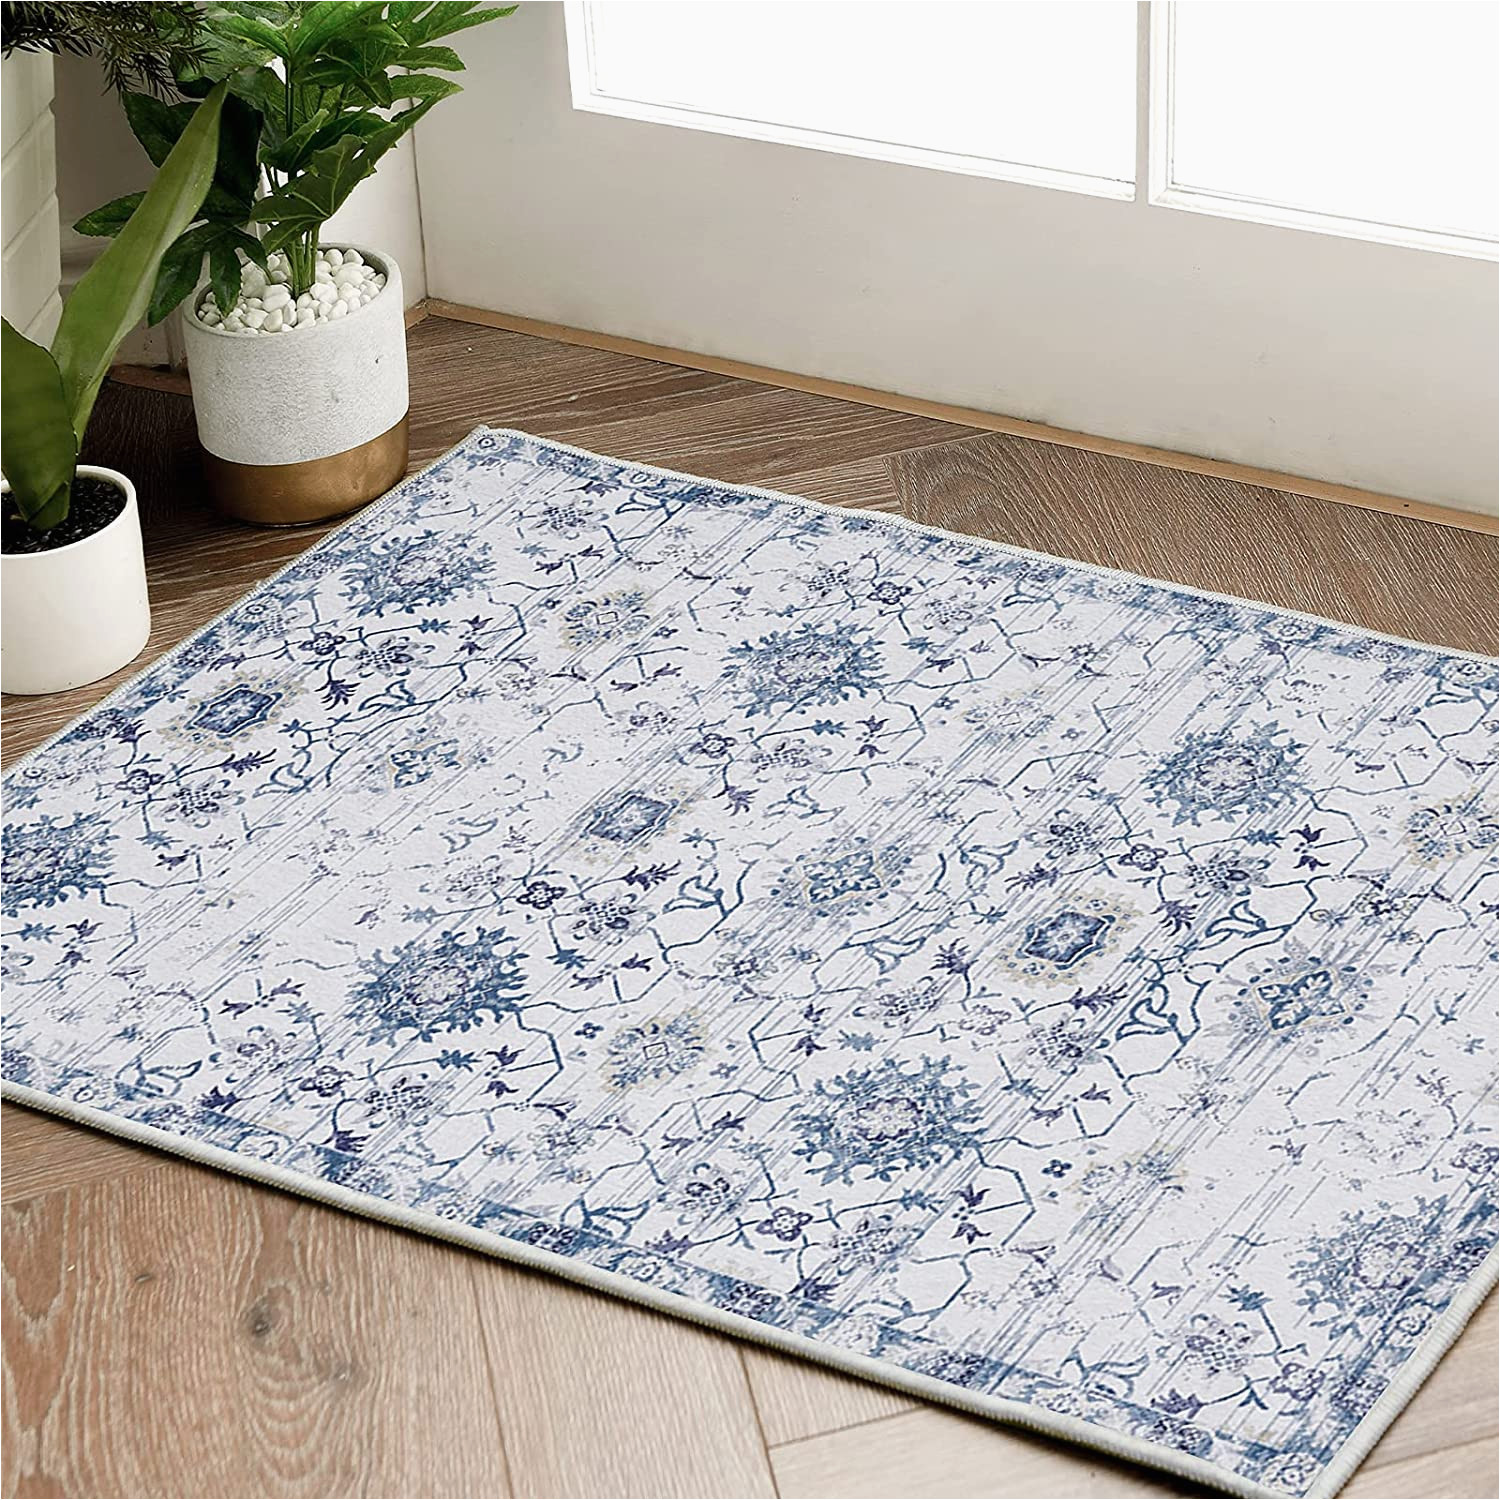 Blue and White Floral area Rugs Vintage Persian Floral Navy Blue area Rug â Jinchan Rugs